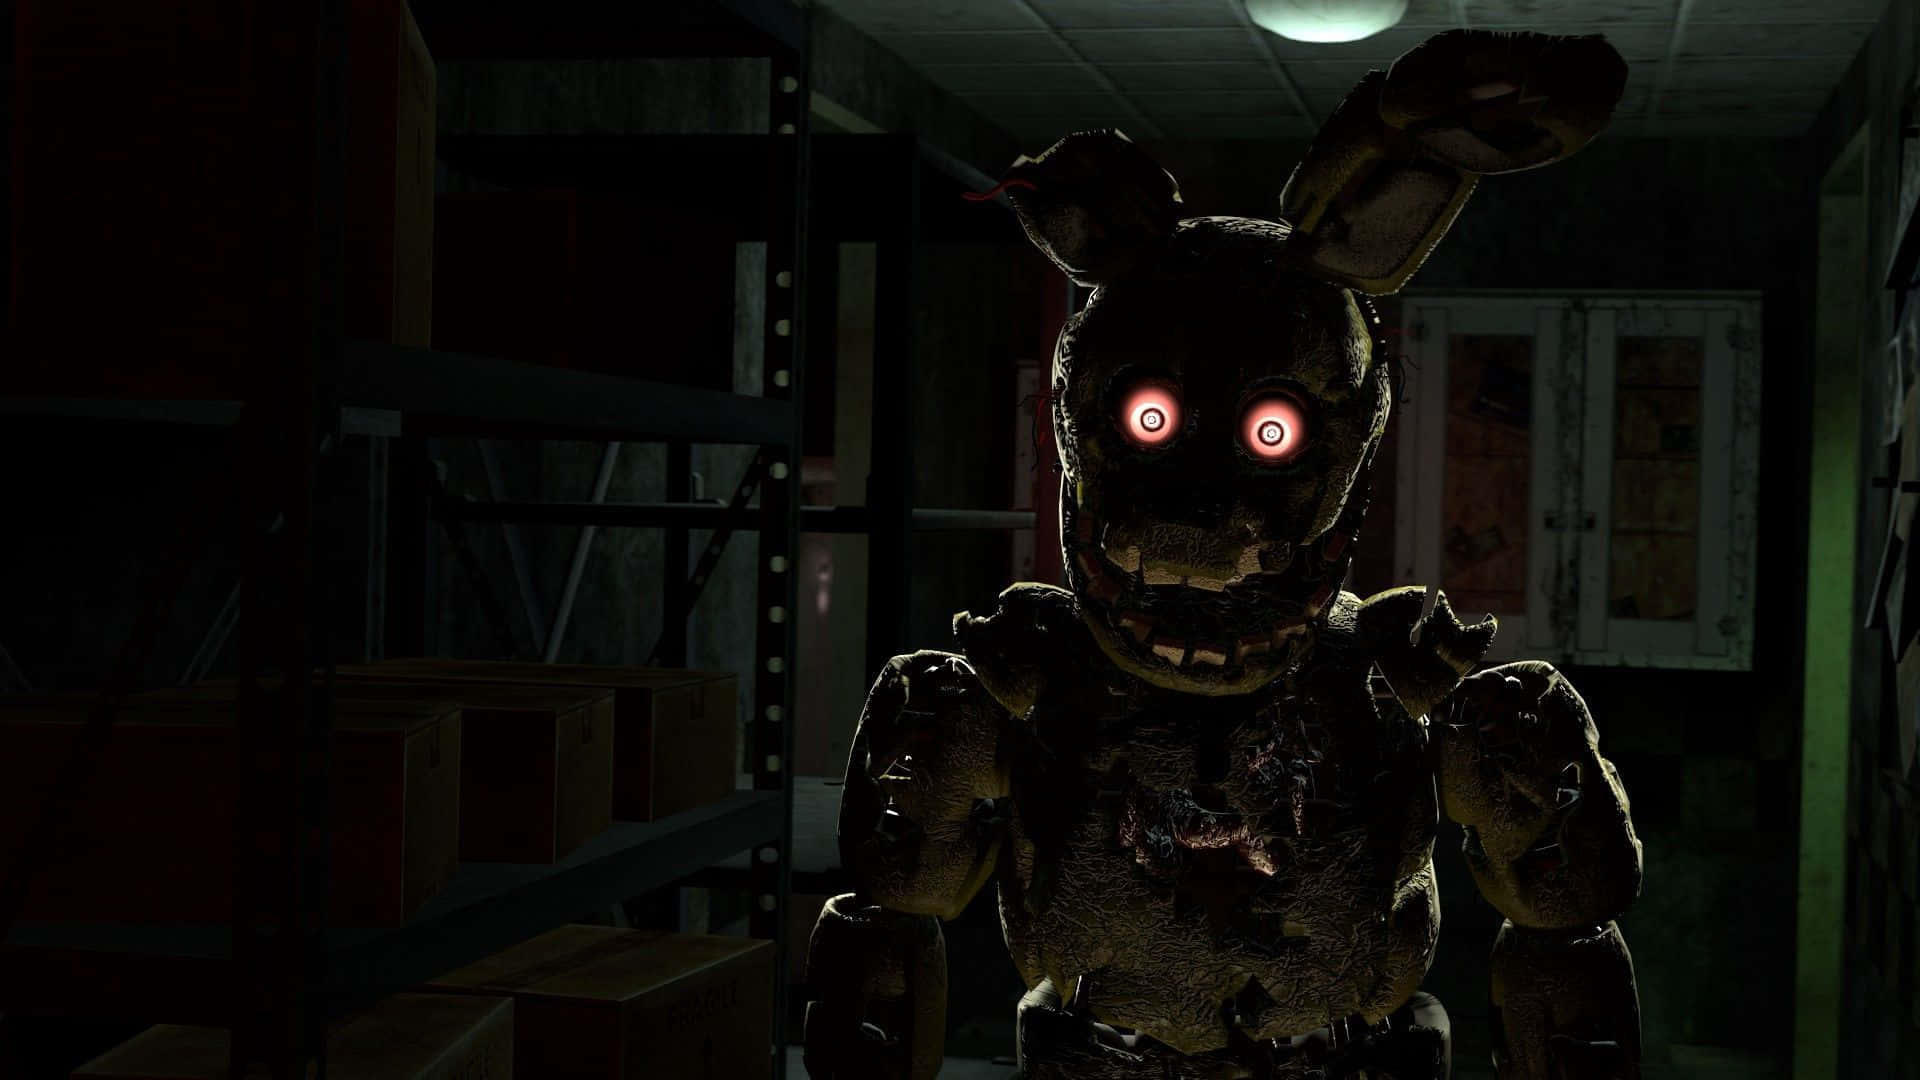 Springtrap in the shadows - A menacing Springtrap character lurking in the darkness Wallpaper